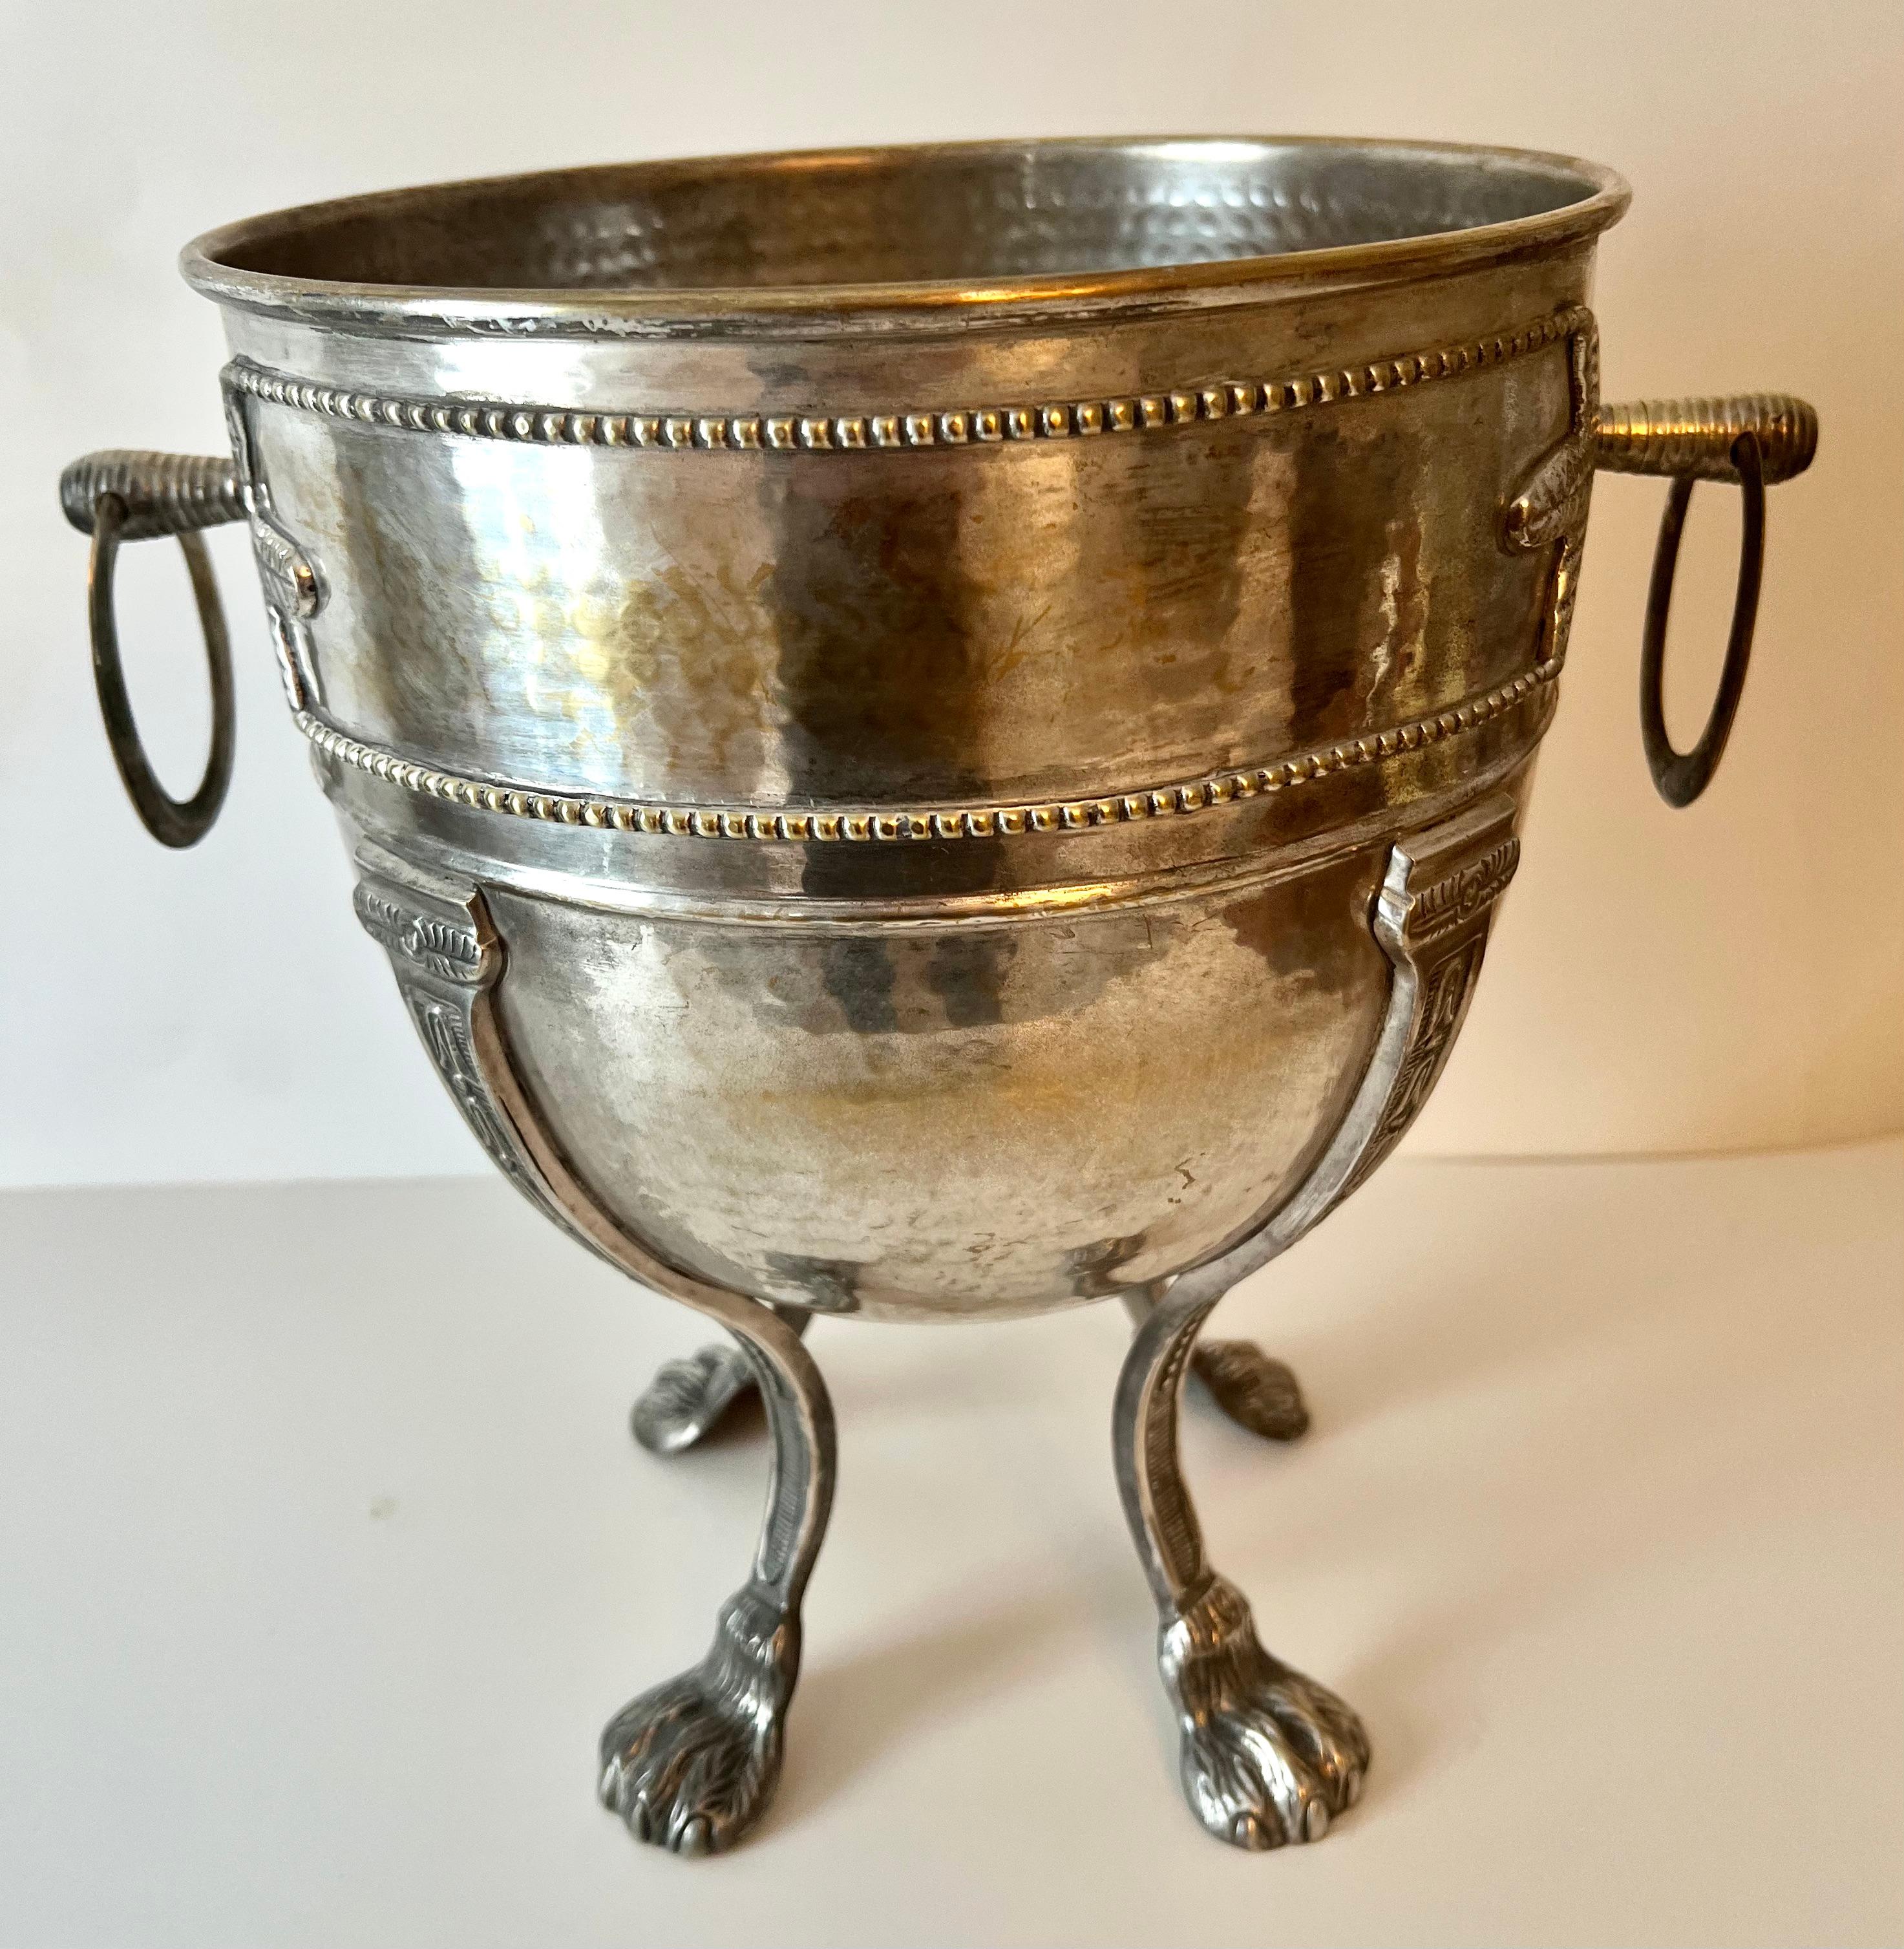 Uniquely detailed Silver Plate Jardiniere or Planter the also makes a fantastic Champagne chiller or ice bucket. The details are wonderful with side handles and a beautiful patinated finish.

A compliment as a planter with a lush plant, or for